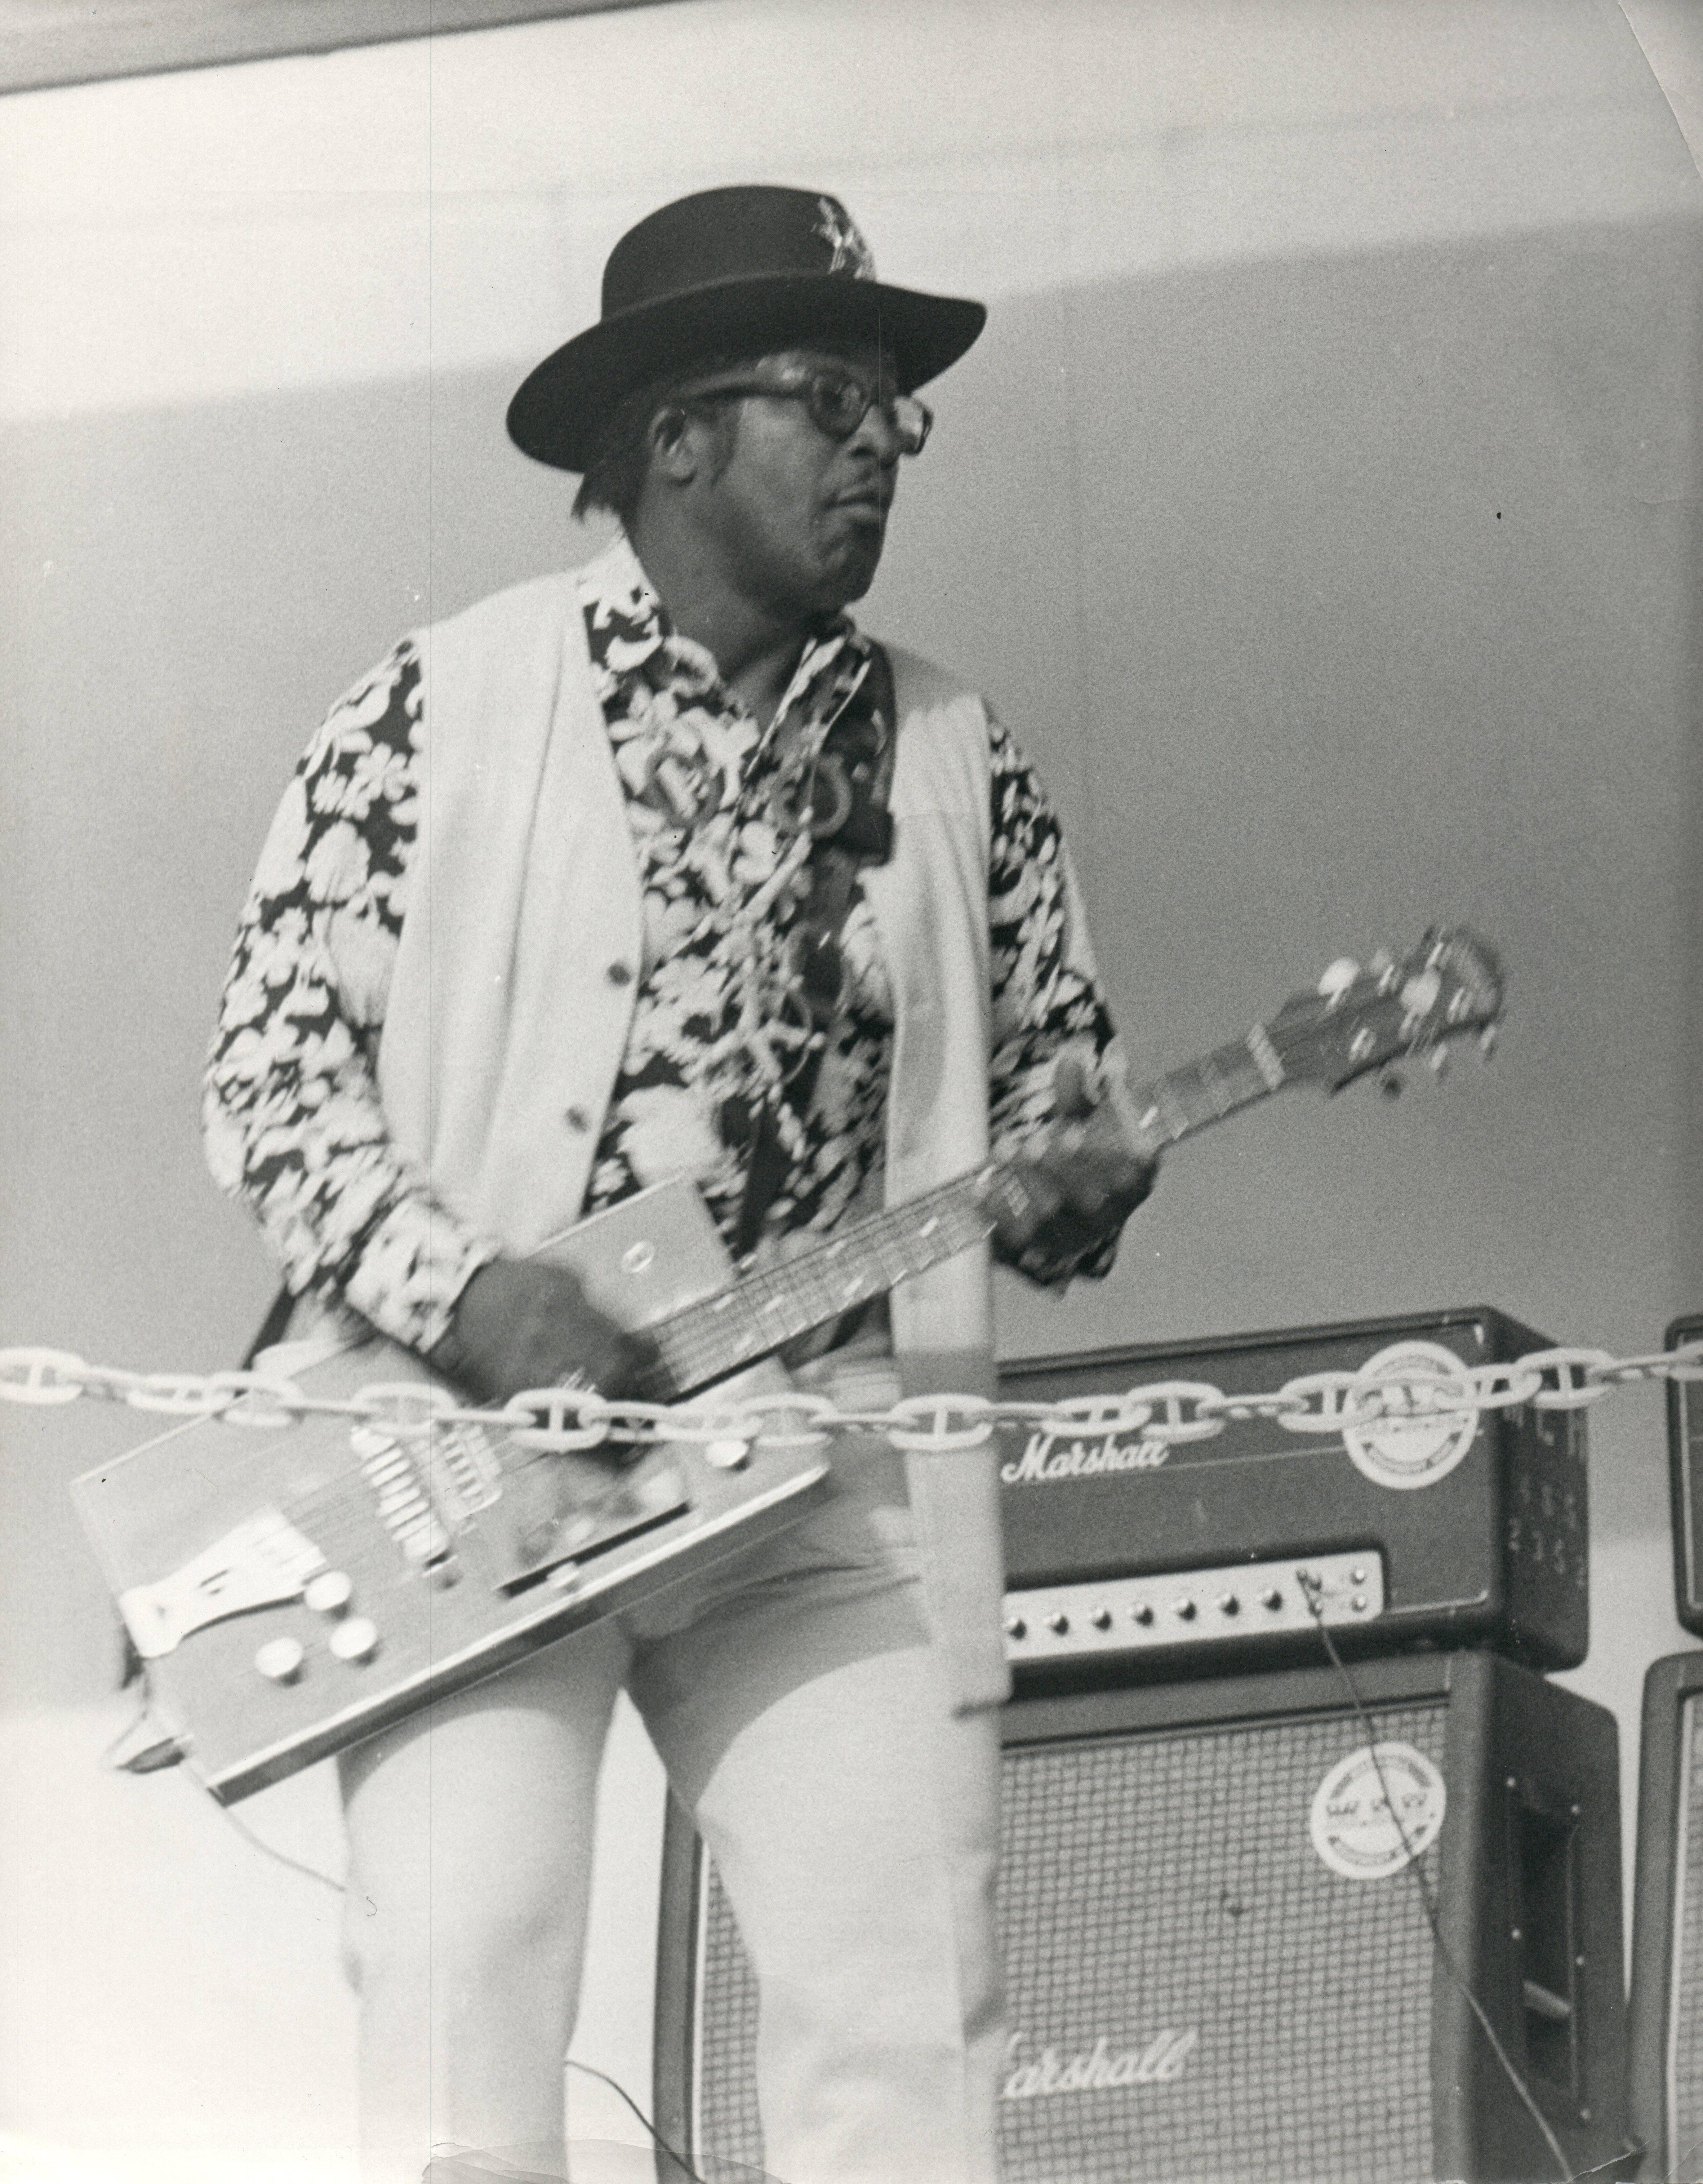 Unknown Black and White Photograph - Bo Diddley in Concert Vintage Original Photograph